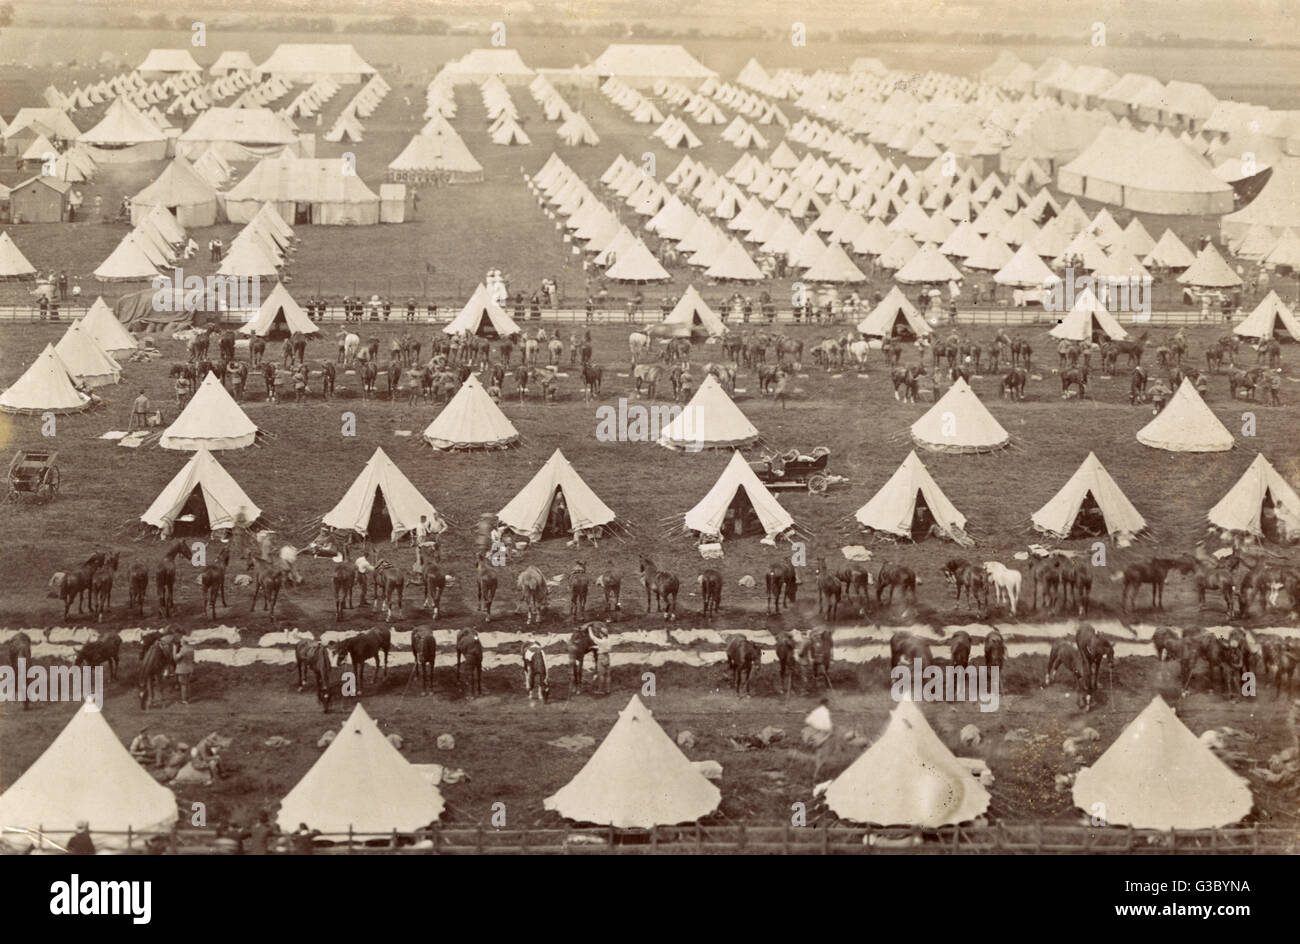 Mounted troops in camp, with rows of tents.      Date: circa 1910 Stock Photo